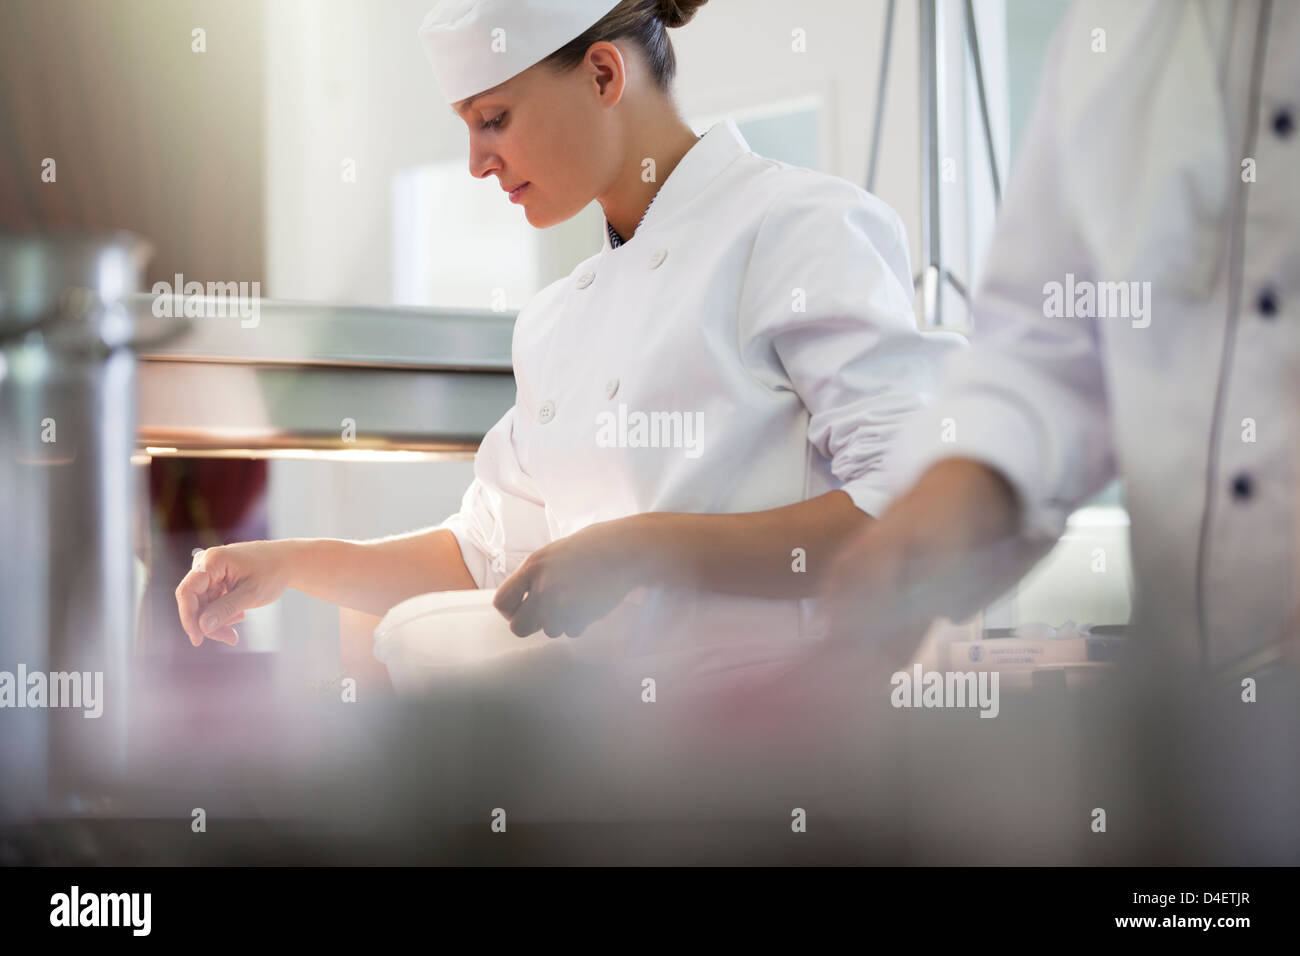 Chef cooking in restaurant kitchen Banque D'Images